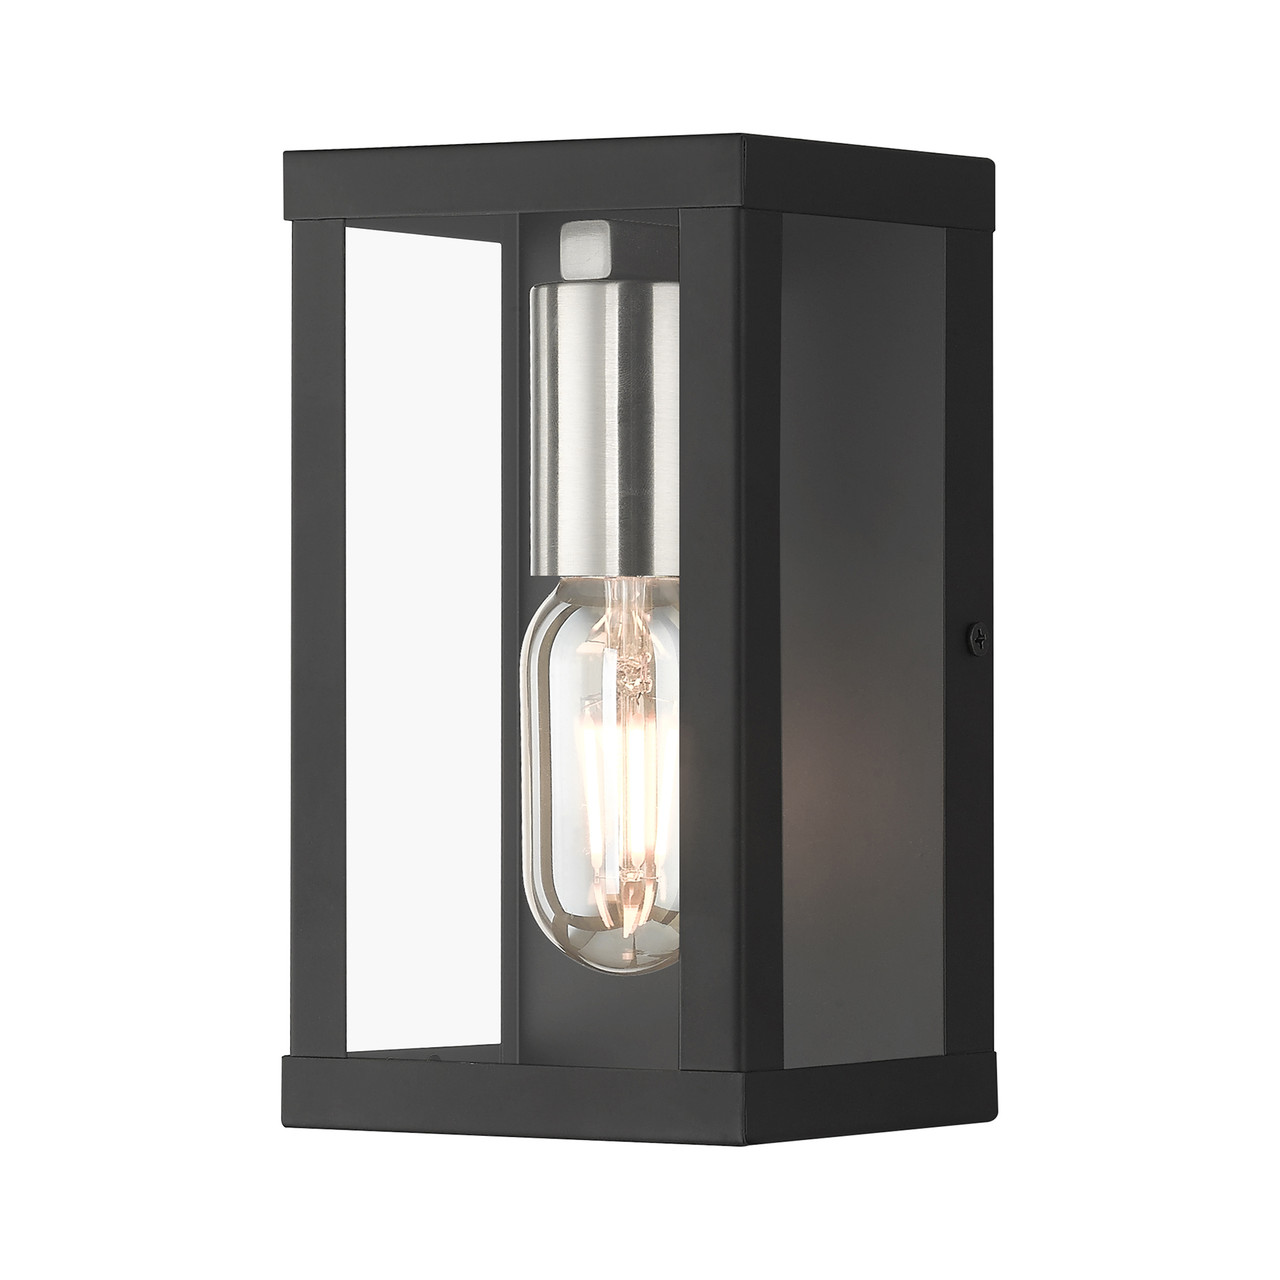 LIVEX LIGHTING 28031-04 1 Light Black Outdoor ADA Small Wall Lantern with Brushed Nickel Finish Accents